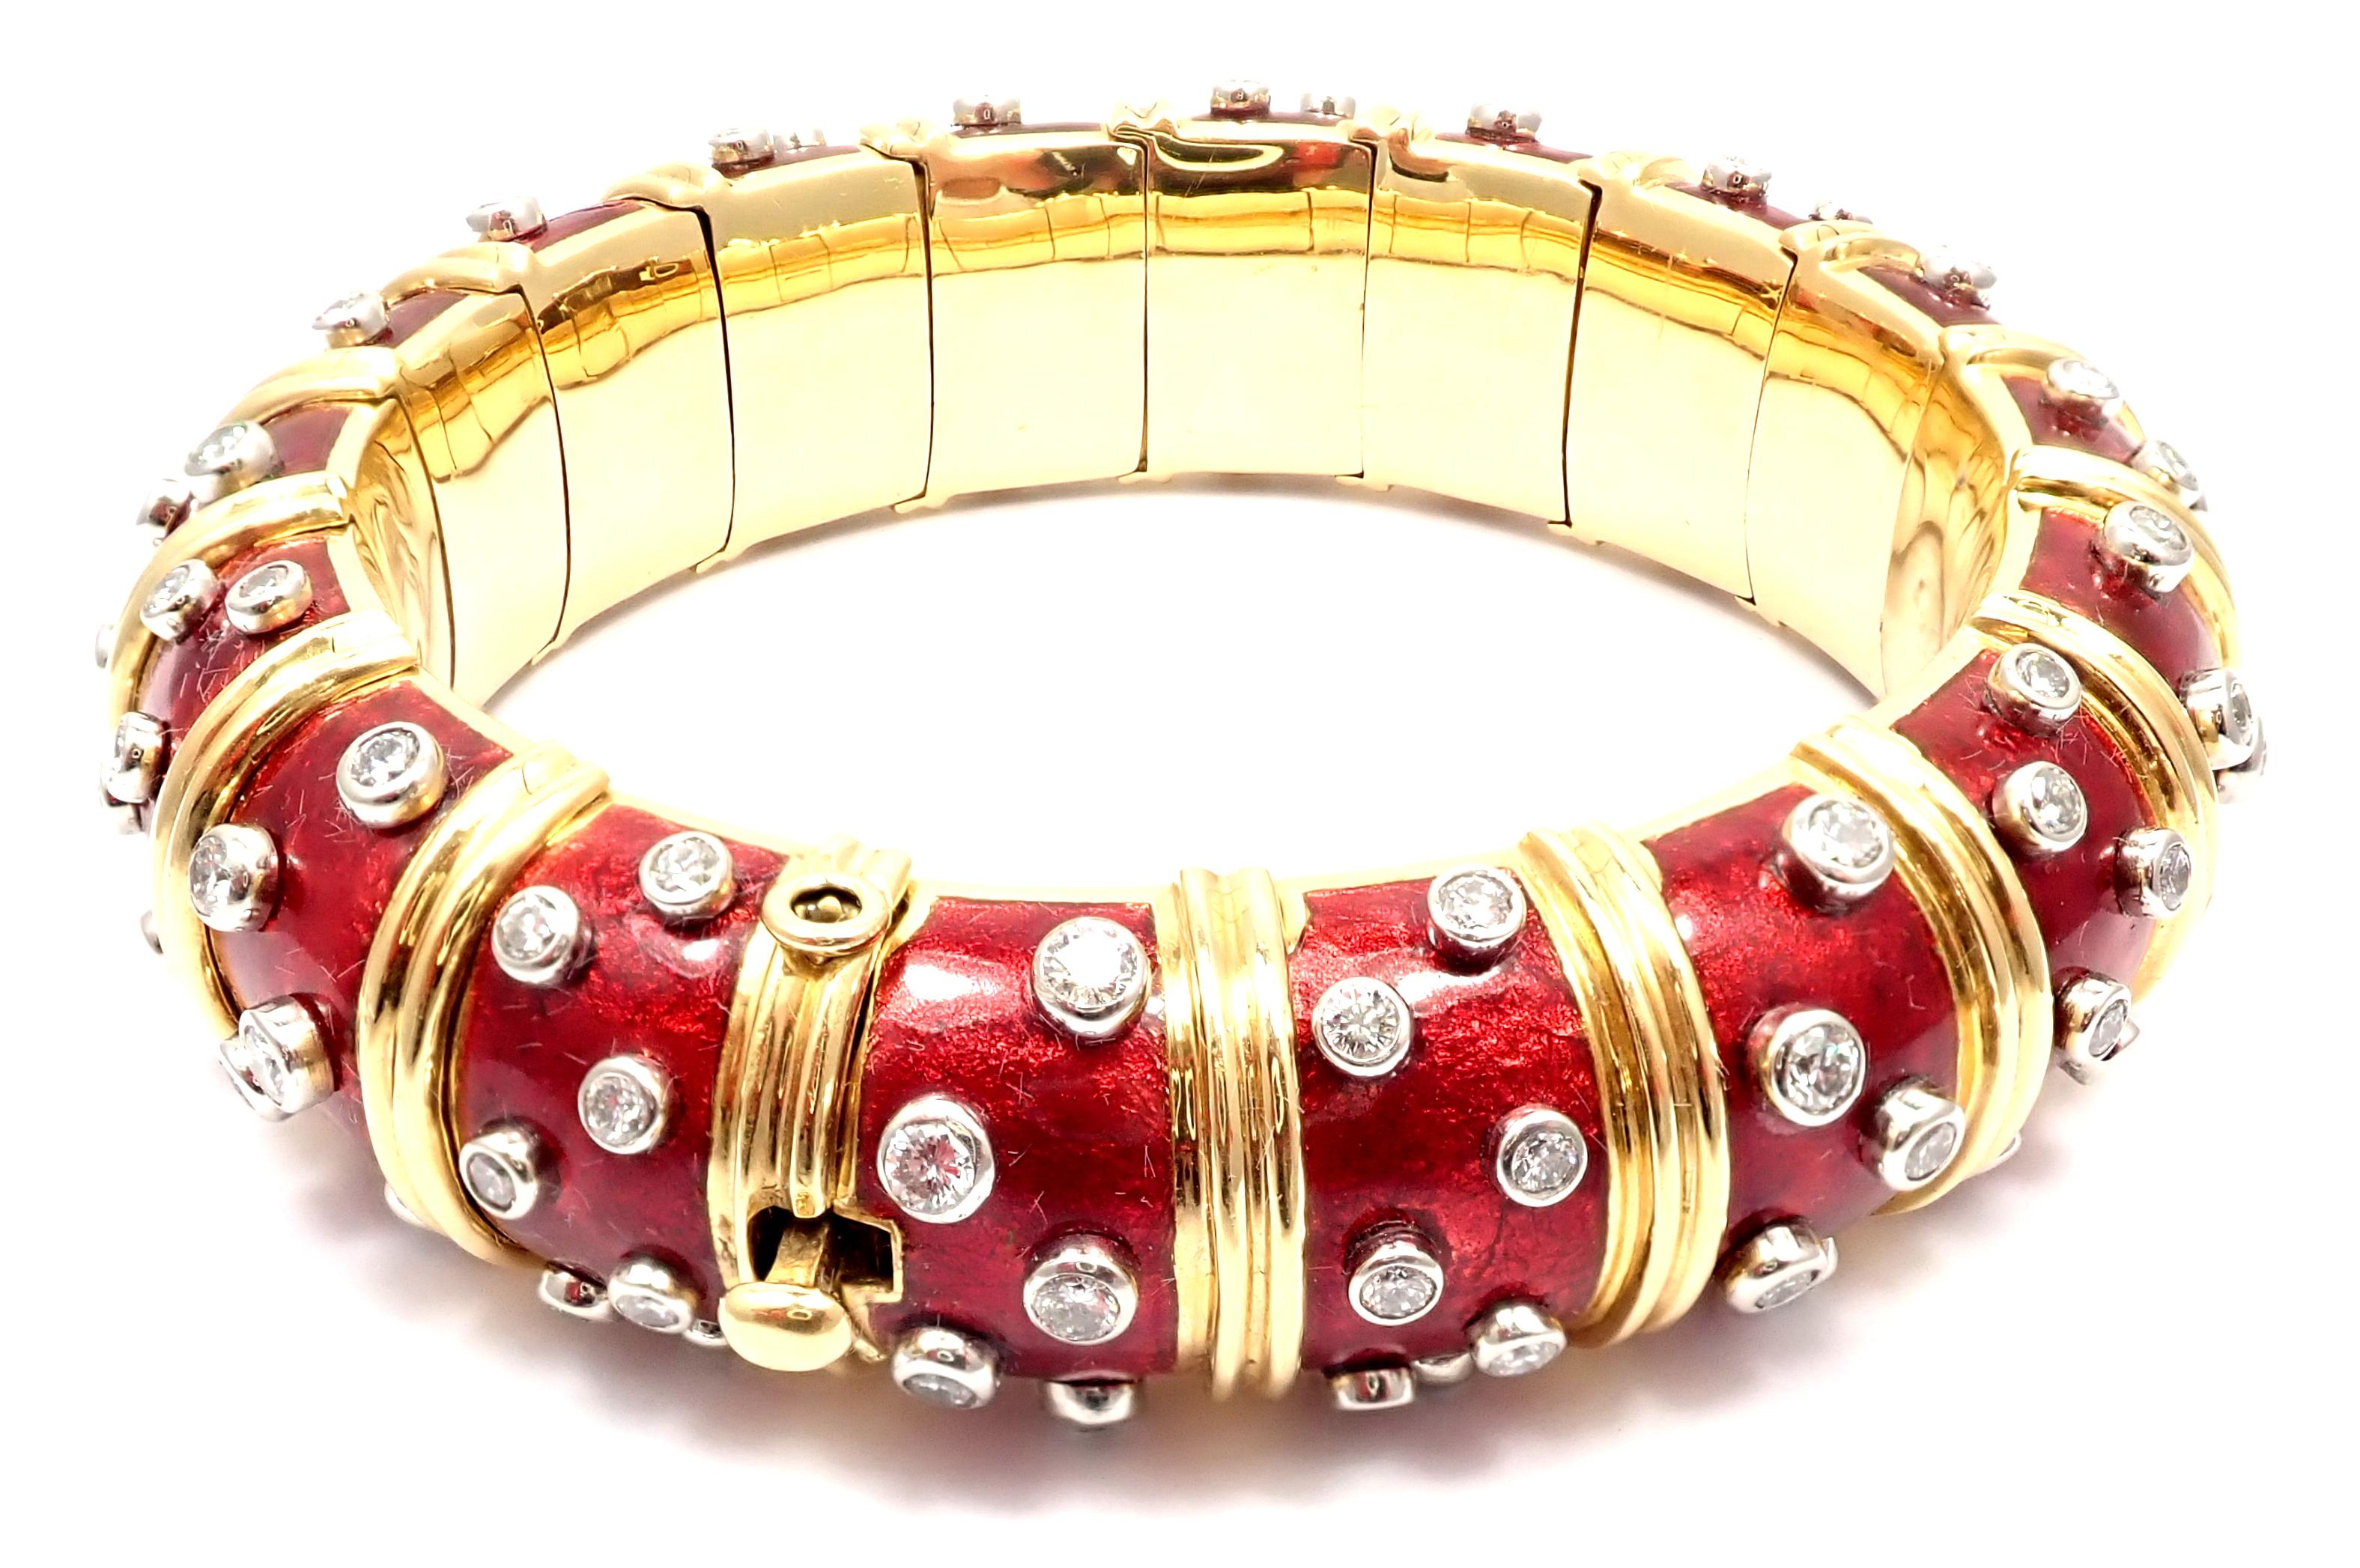 18k Yellow Gold Diamond Paillonne Red Enamel Wide Bangle Bracelet by Jean Schlumberger for Tiffany & Co.
With 108 round brilliant cut diamonds VS1 clarity, E color at a total diamond weight approximately 8ct.
Measurements:
Length: 7